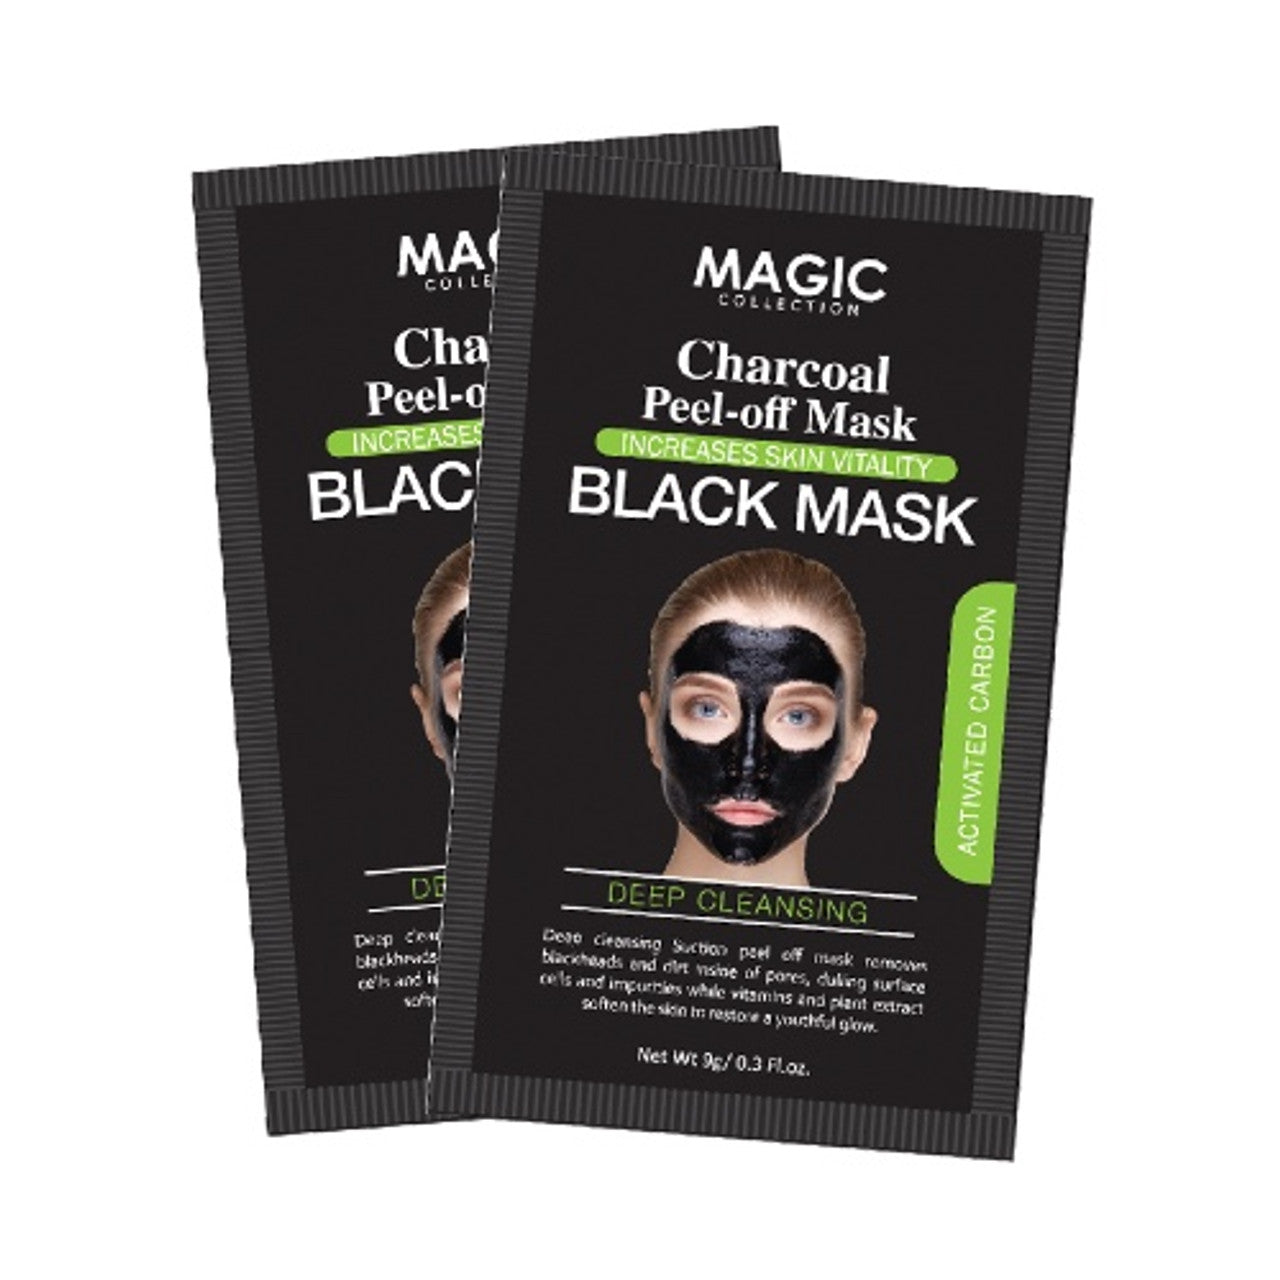 MAGIC COLLECTION - CHARCOAL PEEL-OFF MASK BLACK - BLACK MASK CLEANSING